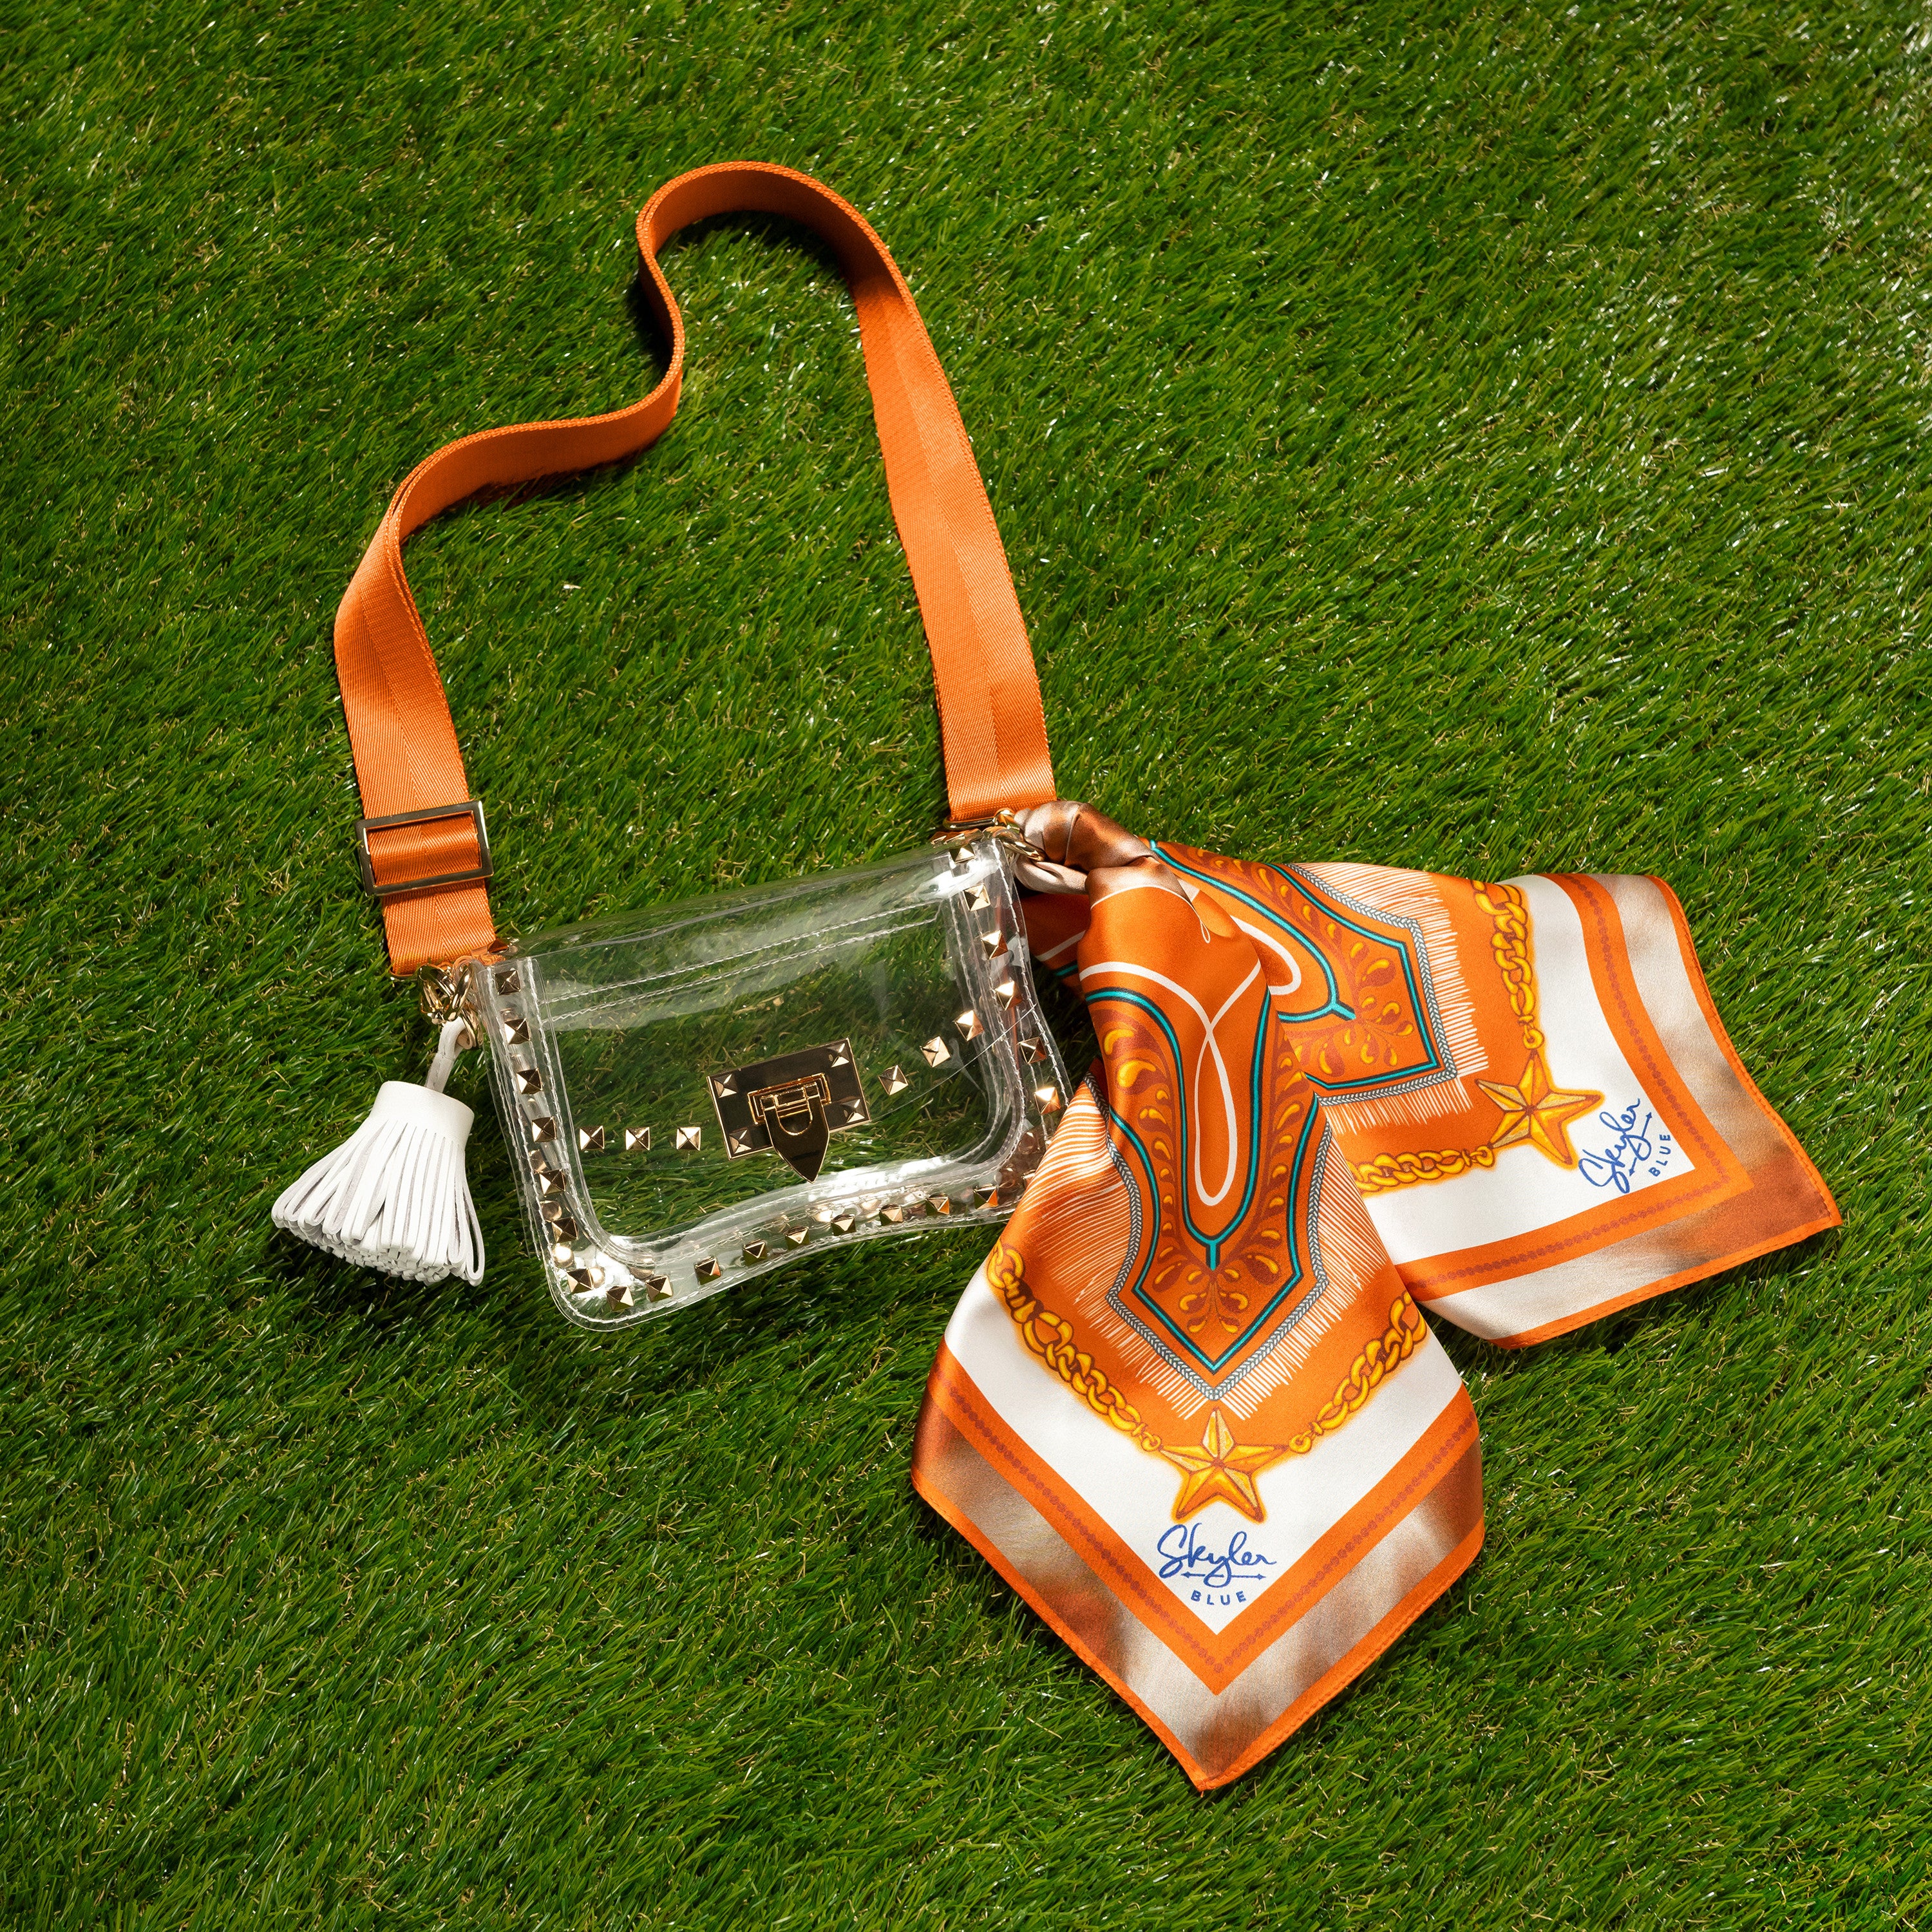 LOUIS VUITTON Revamped Stadium Bag! Approved legal size for